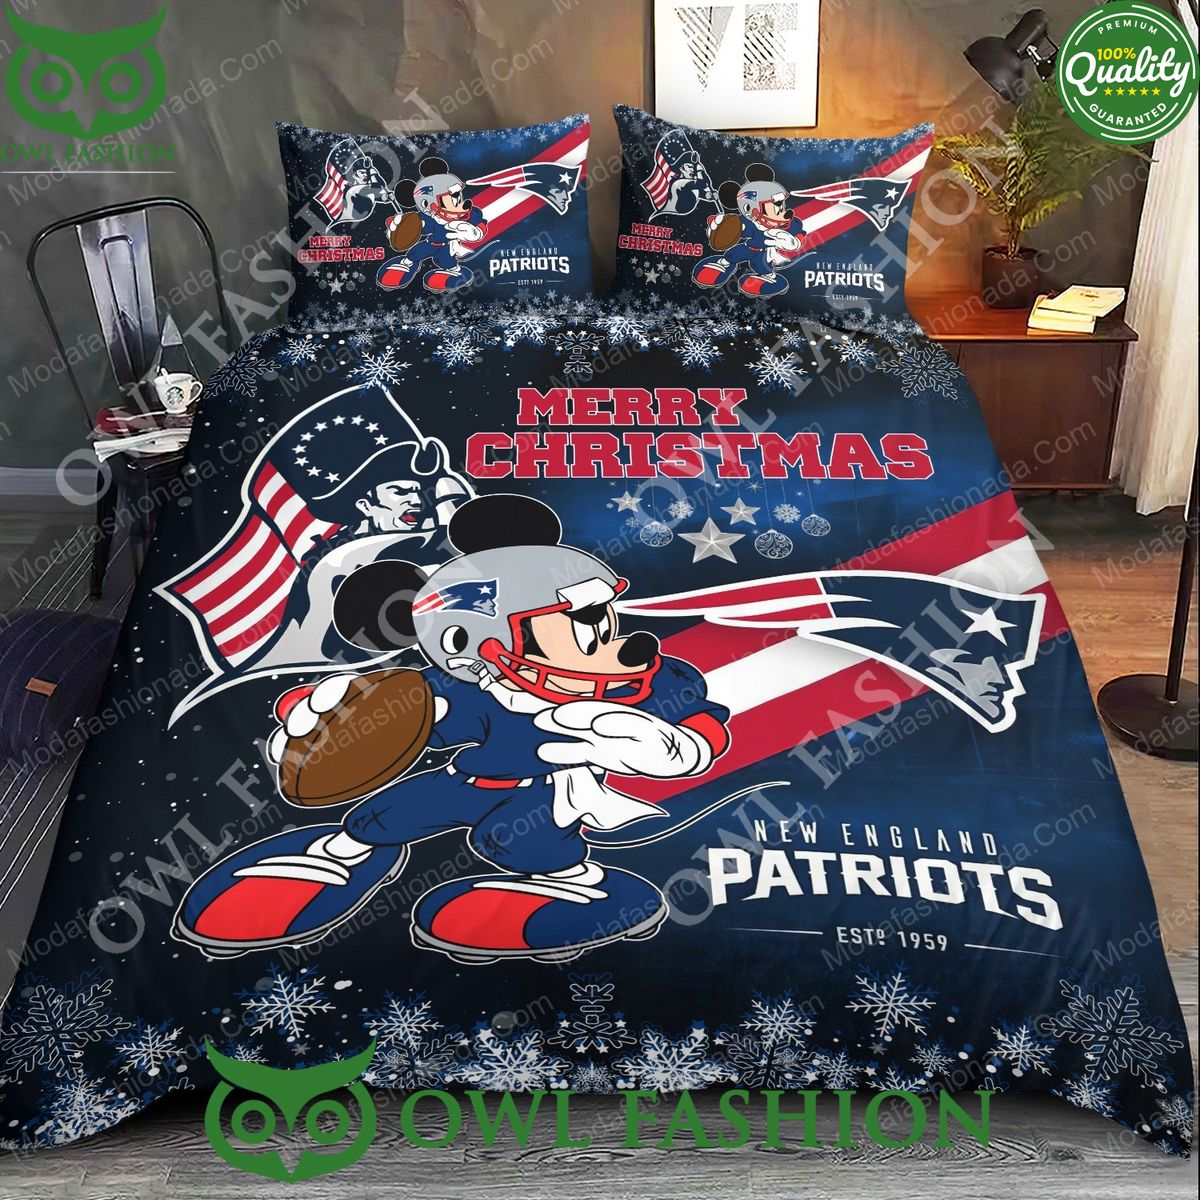 mickey mouse nfl new england patriots christmas bedding sets 1 W2quK.jpg